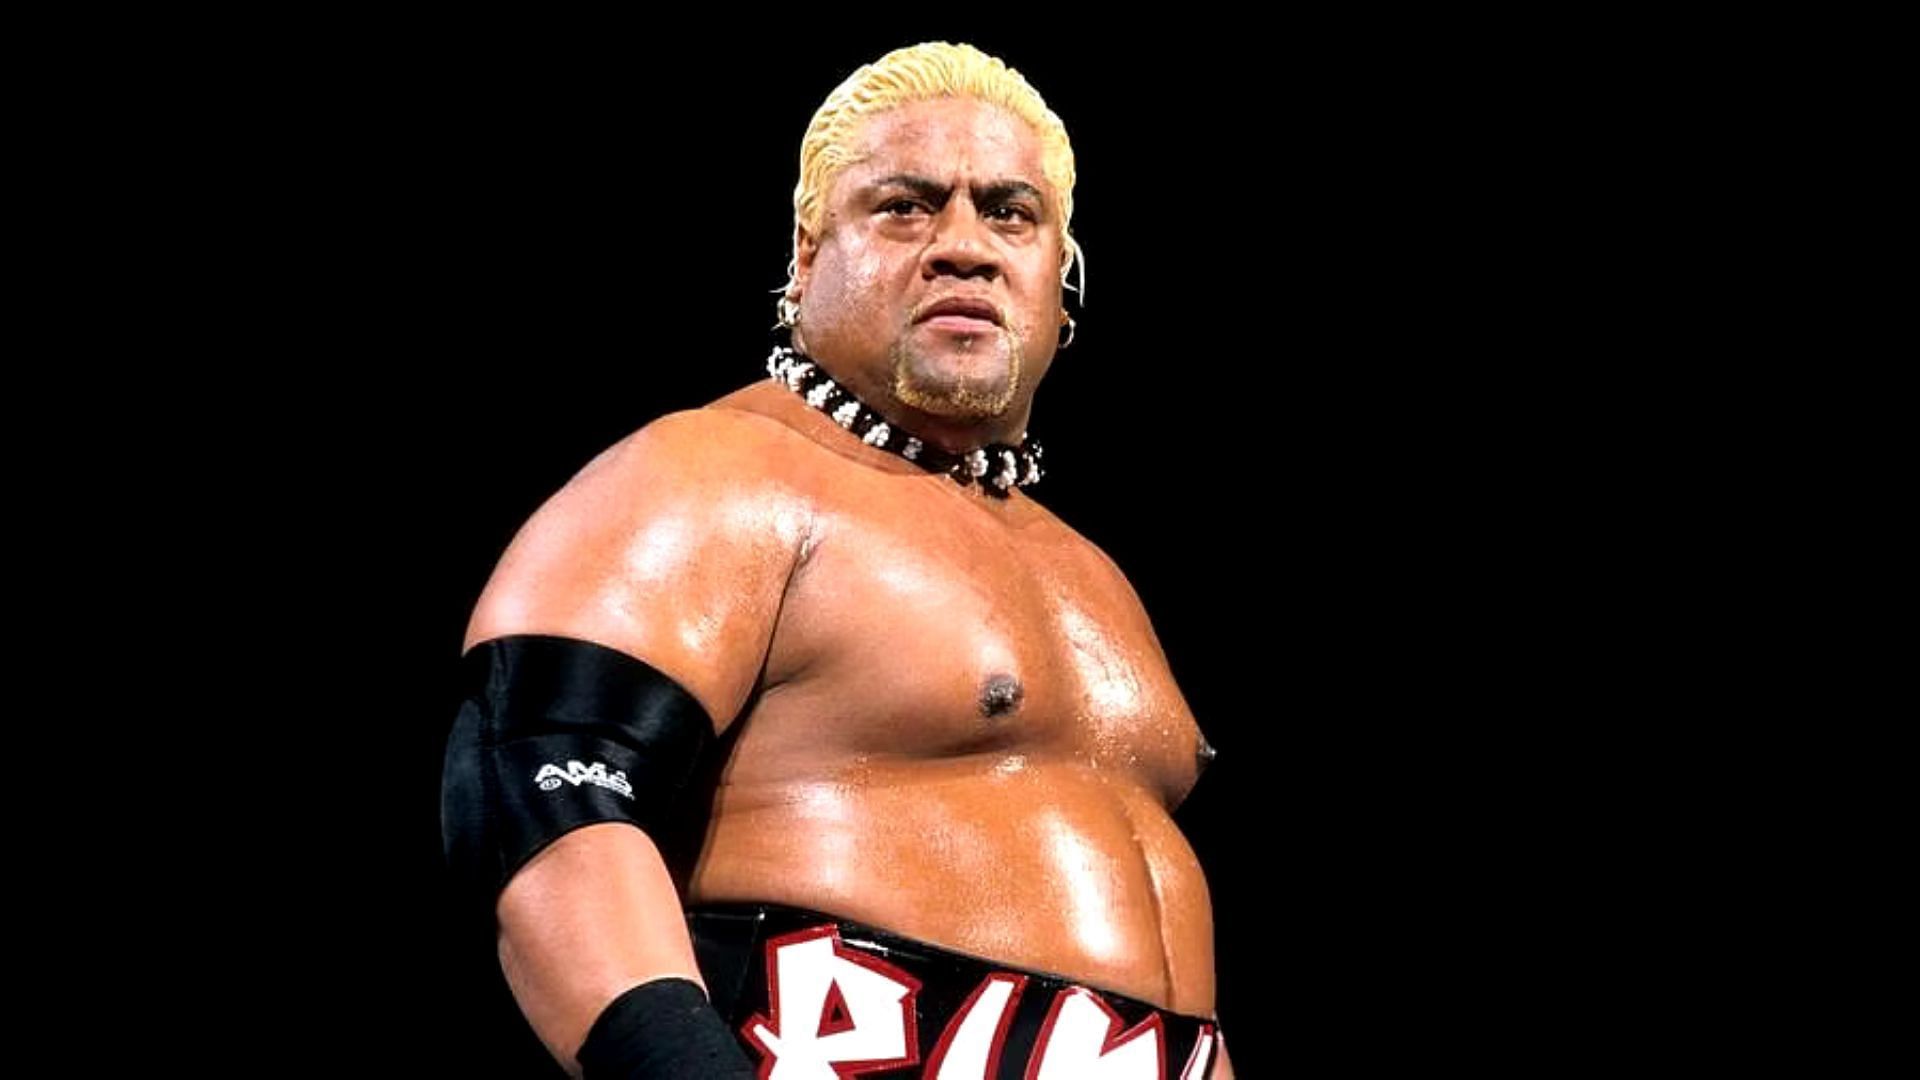 Rikishi has commented on the announcement.